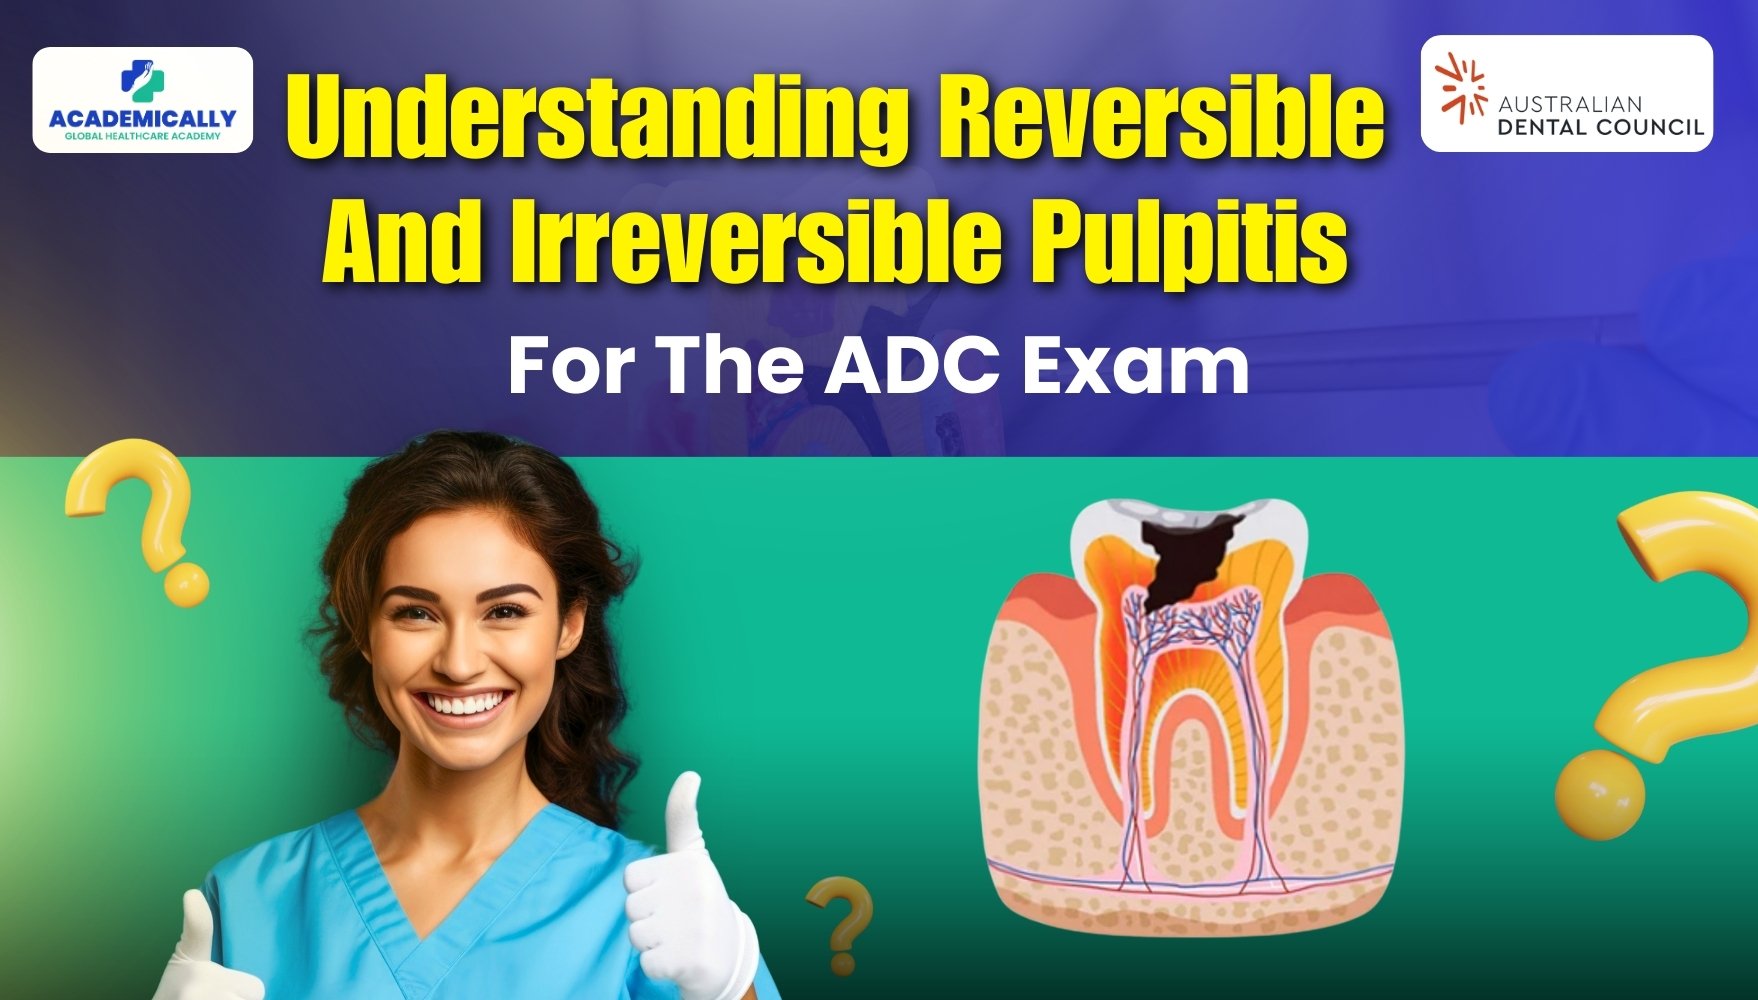 Reversible And Irreversible Pulpitis For ADC Exam